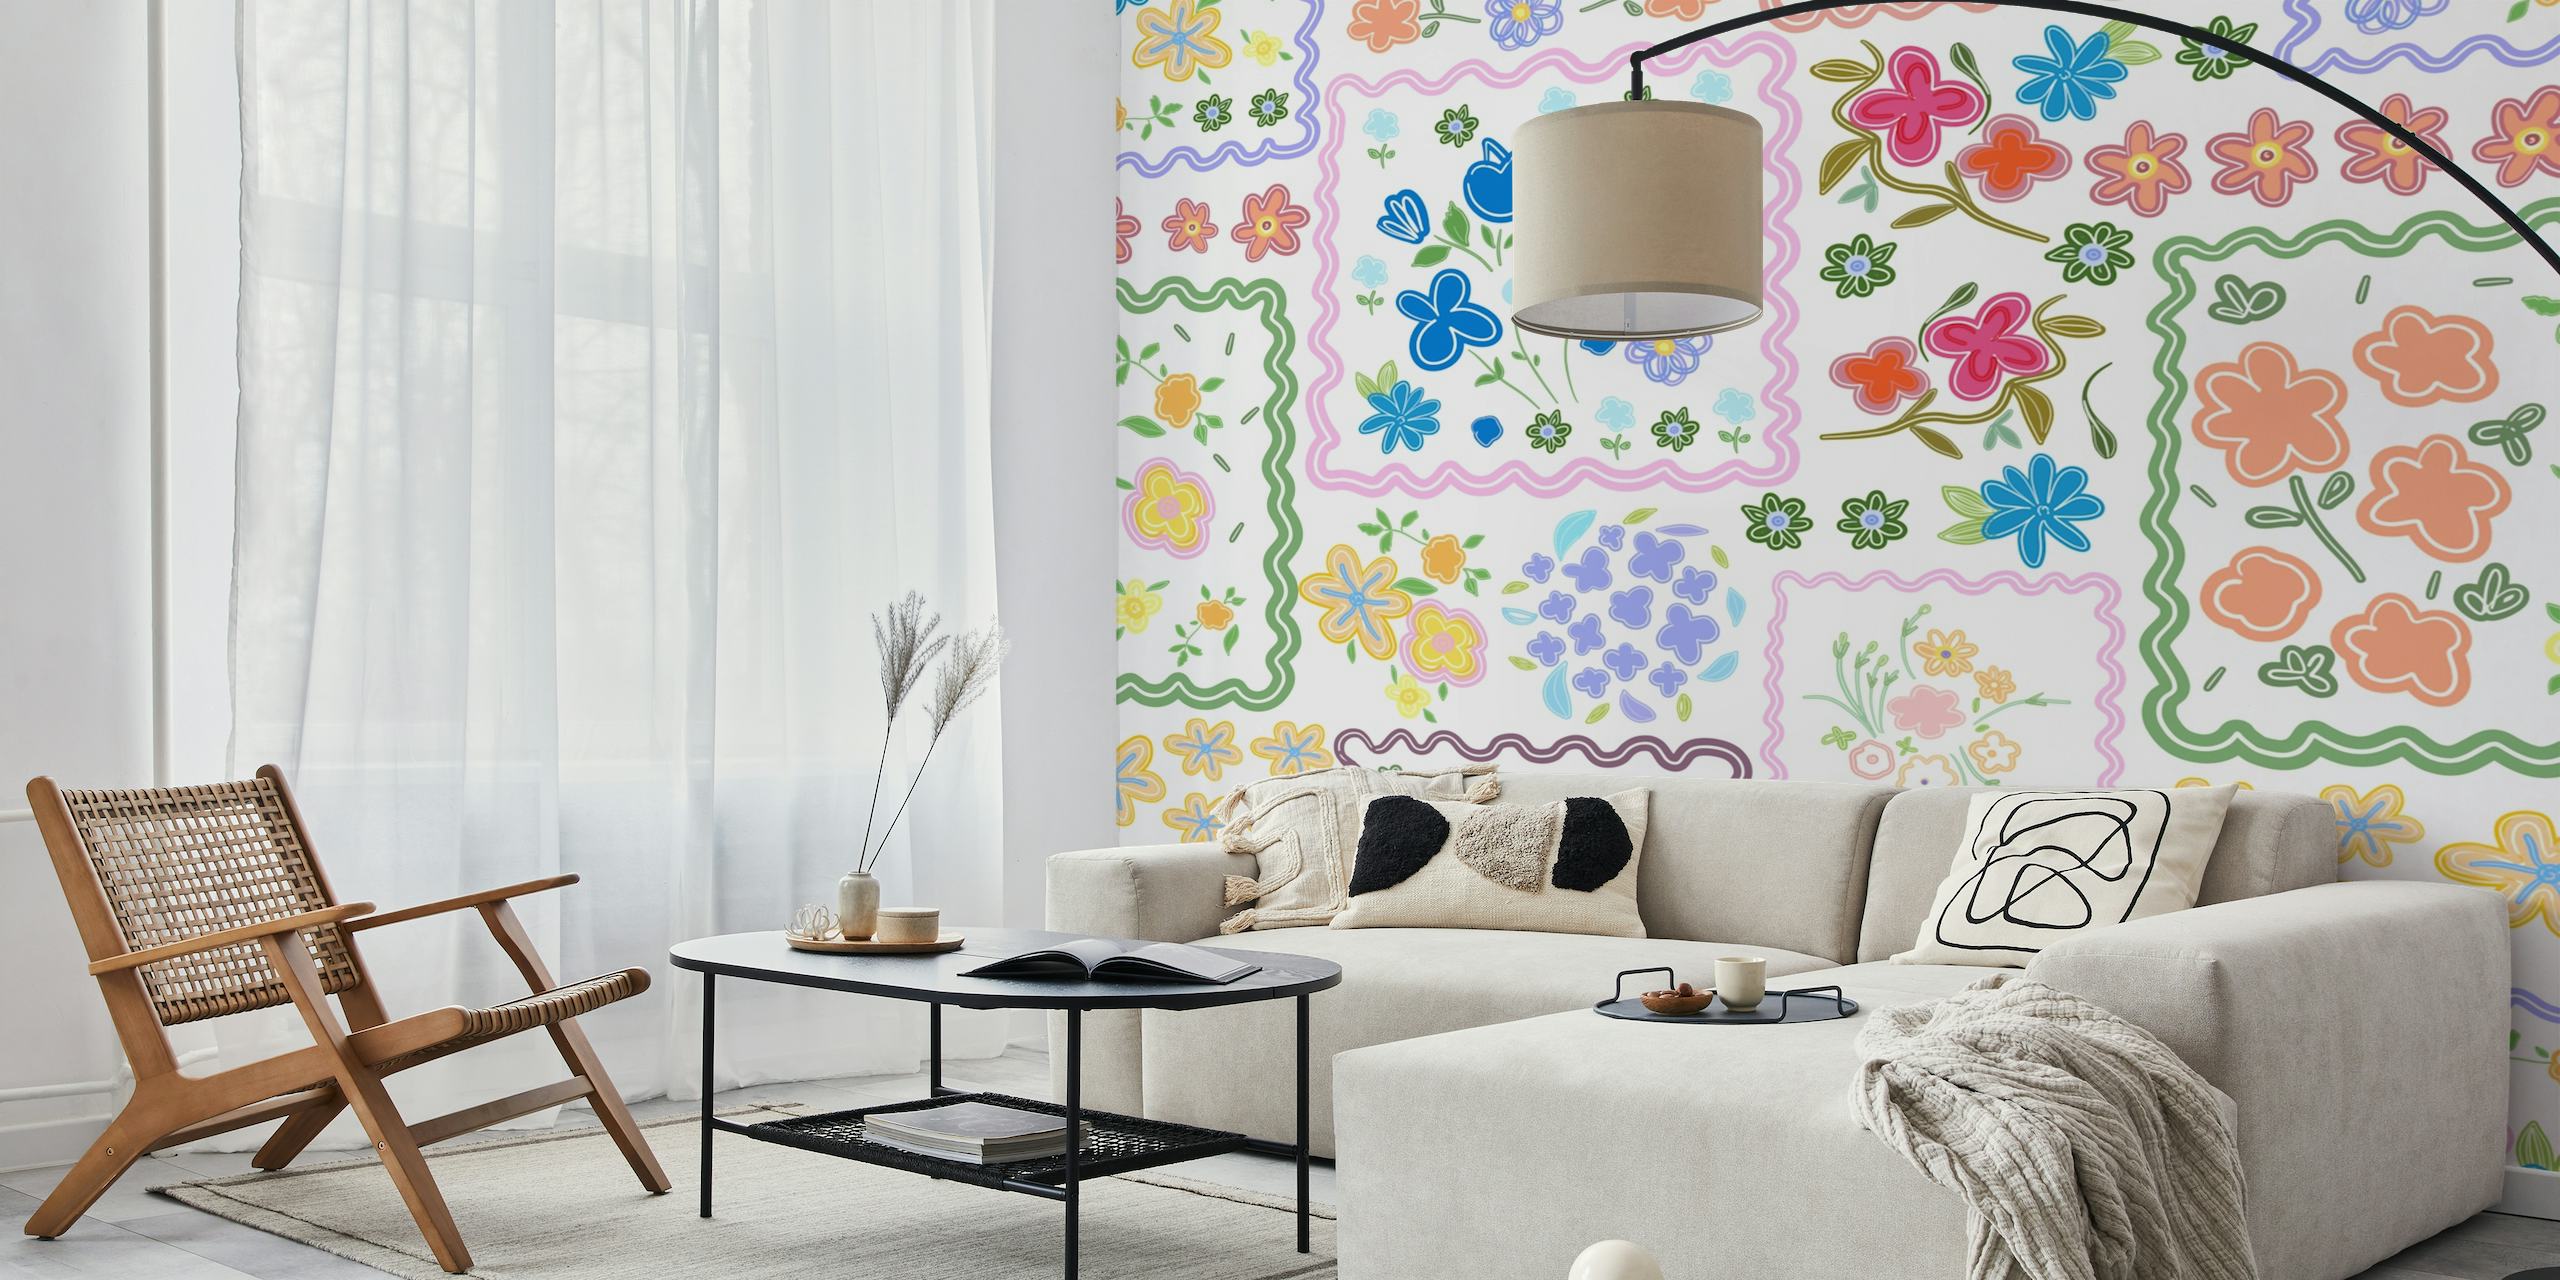 Colorful patchwork-style floral wall mural with a variety of flowers and patterns